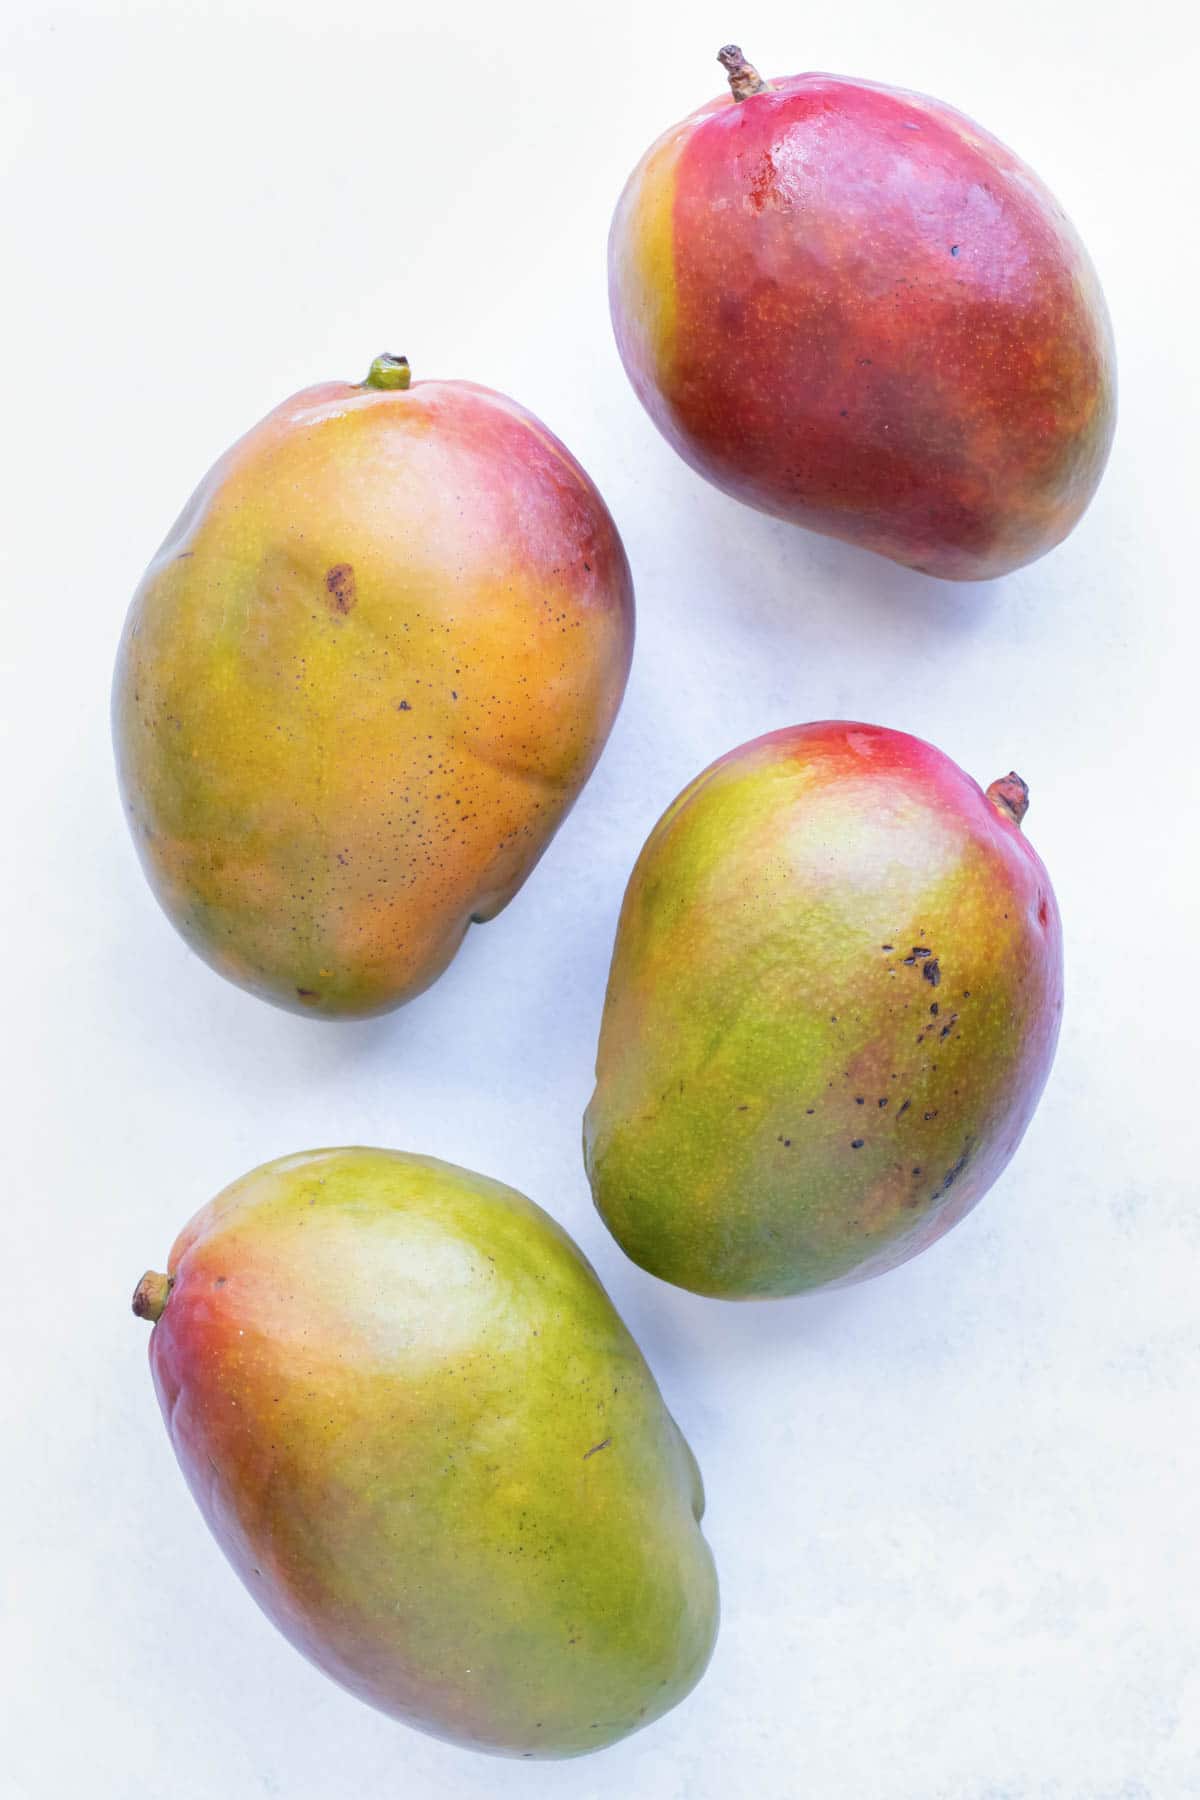 4 Ways to Tell if Your Mango Is Ripe